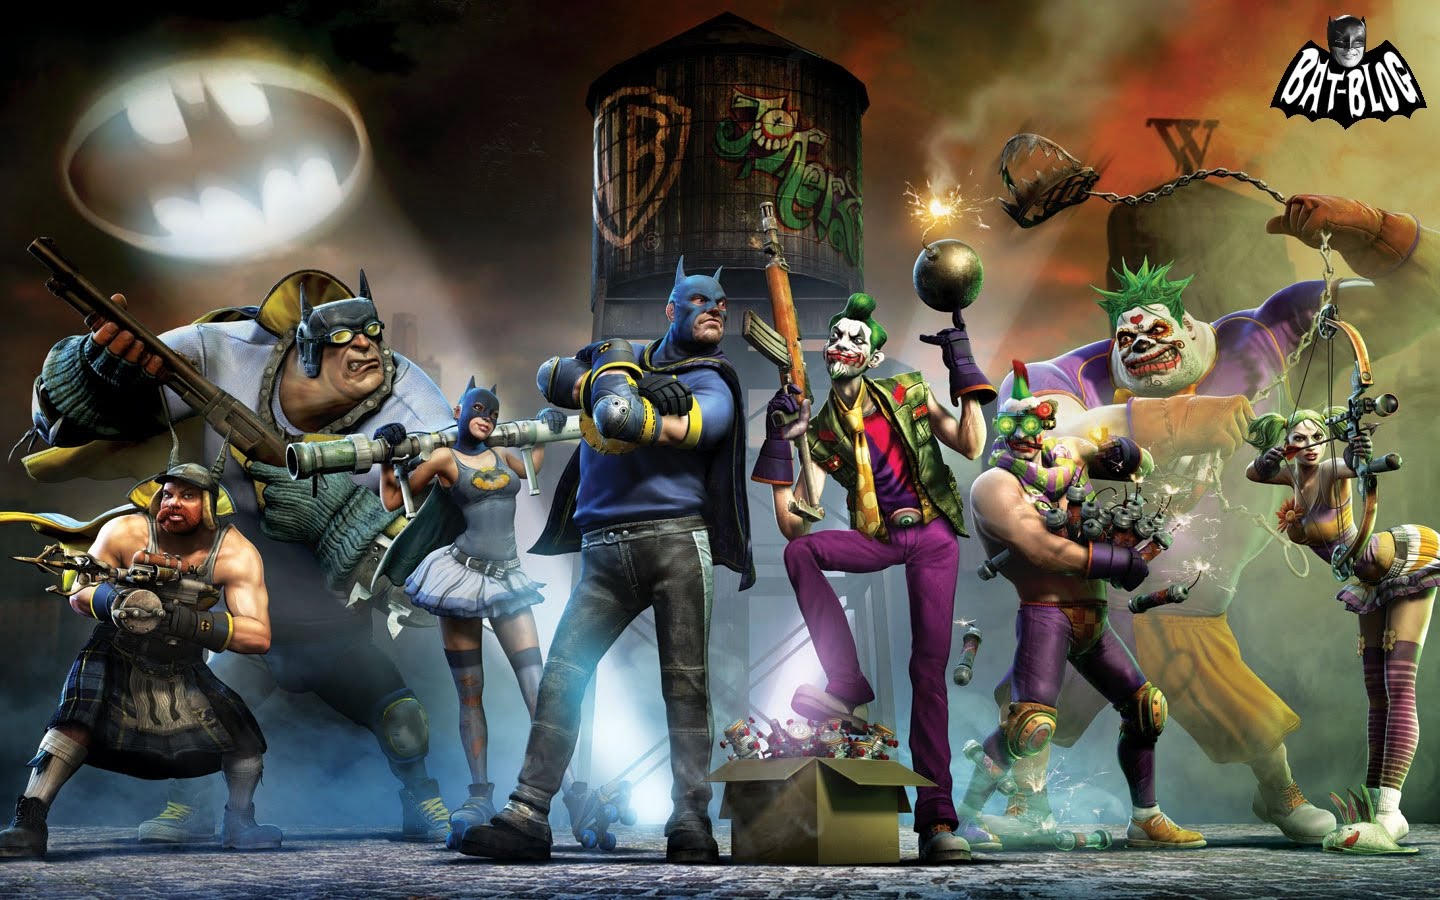 Gotham City Imposters Latest CGI Trailer From WB Games